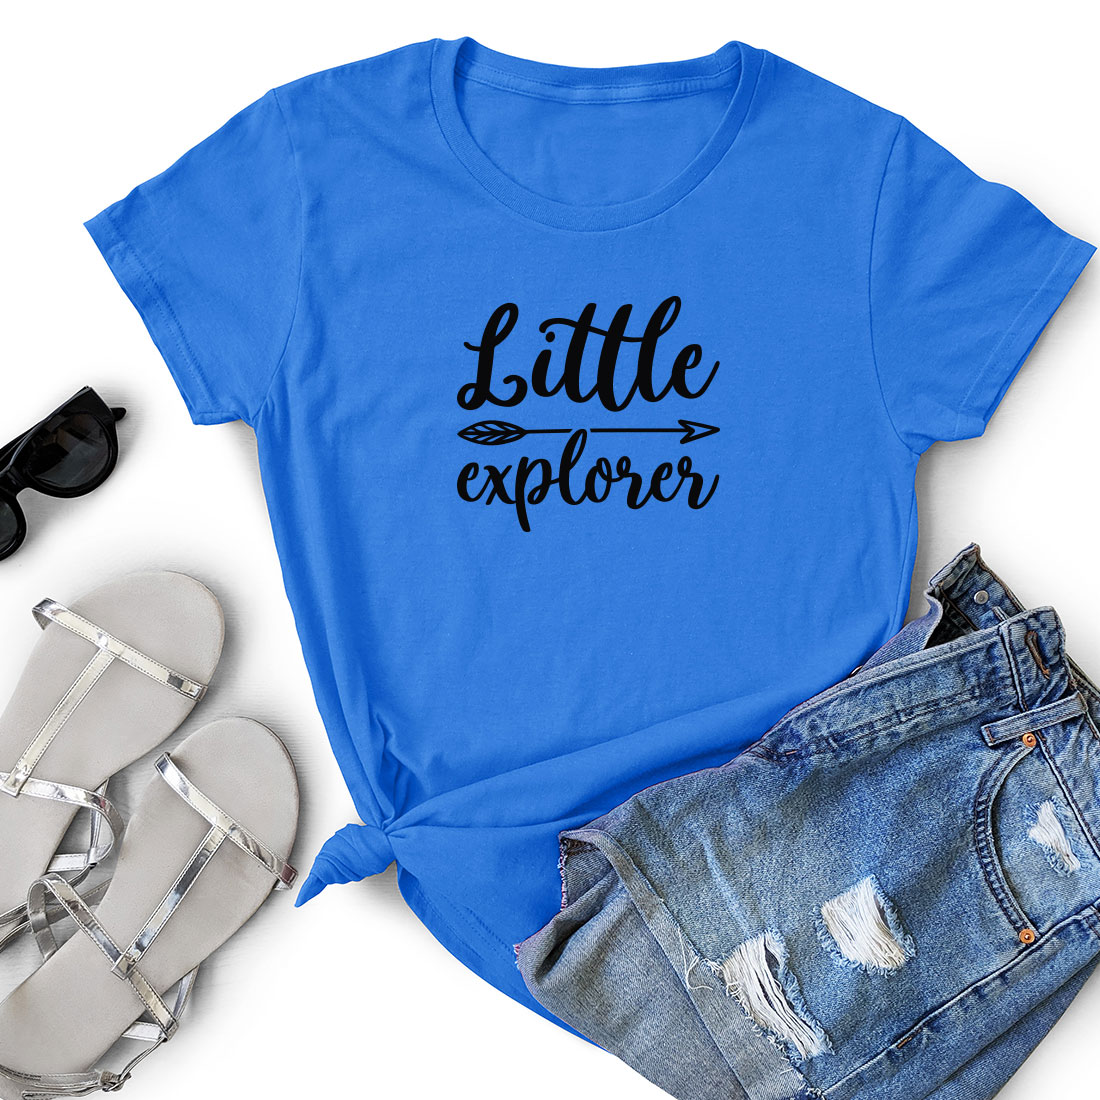 Blue shirt that says little explorer next to a pair of shorts.